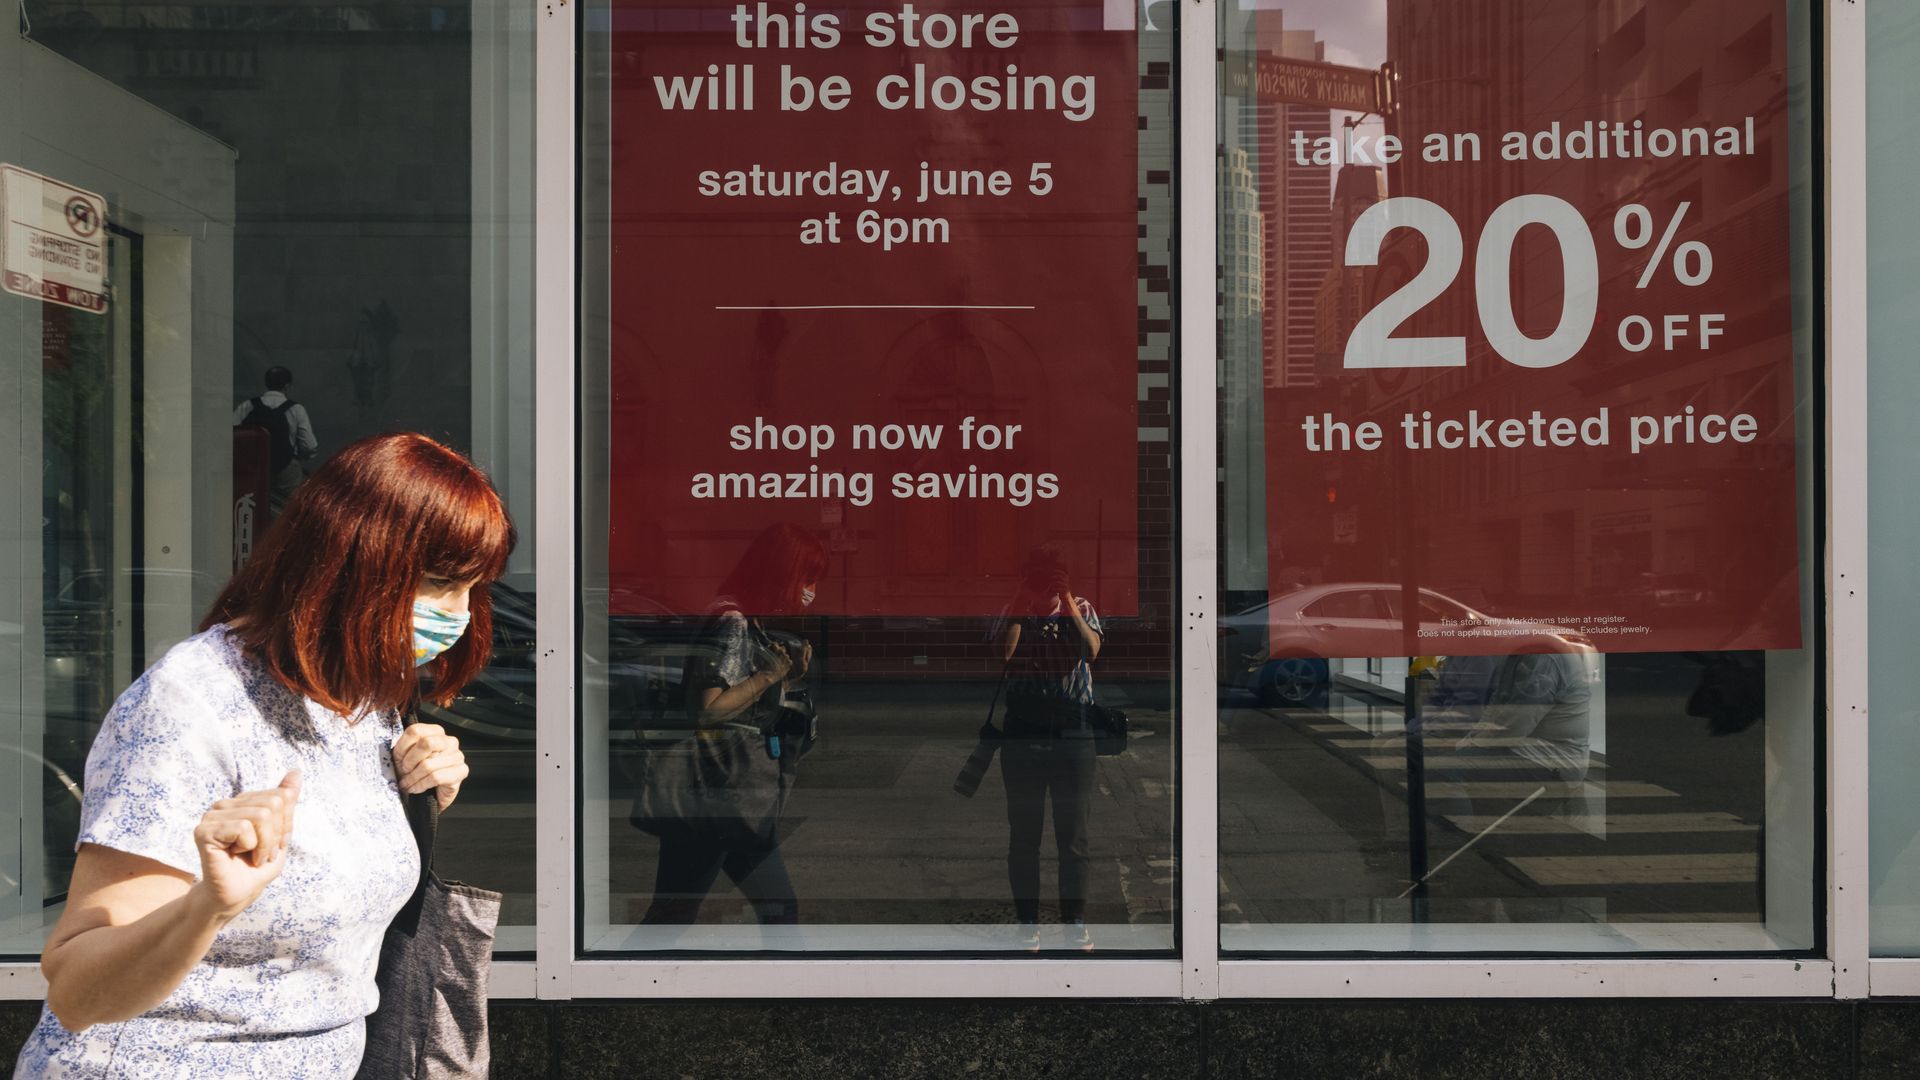 A store closing sign in Chicago in May 2021.